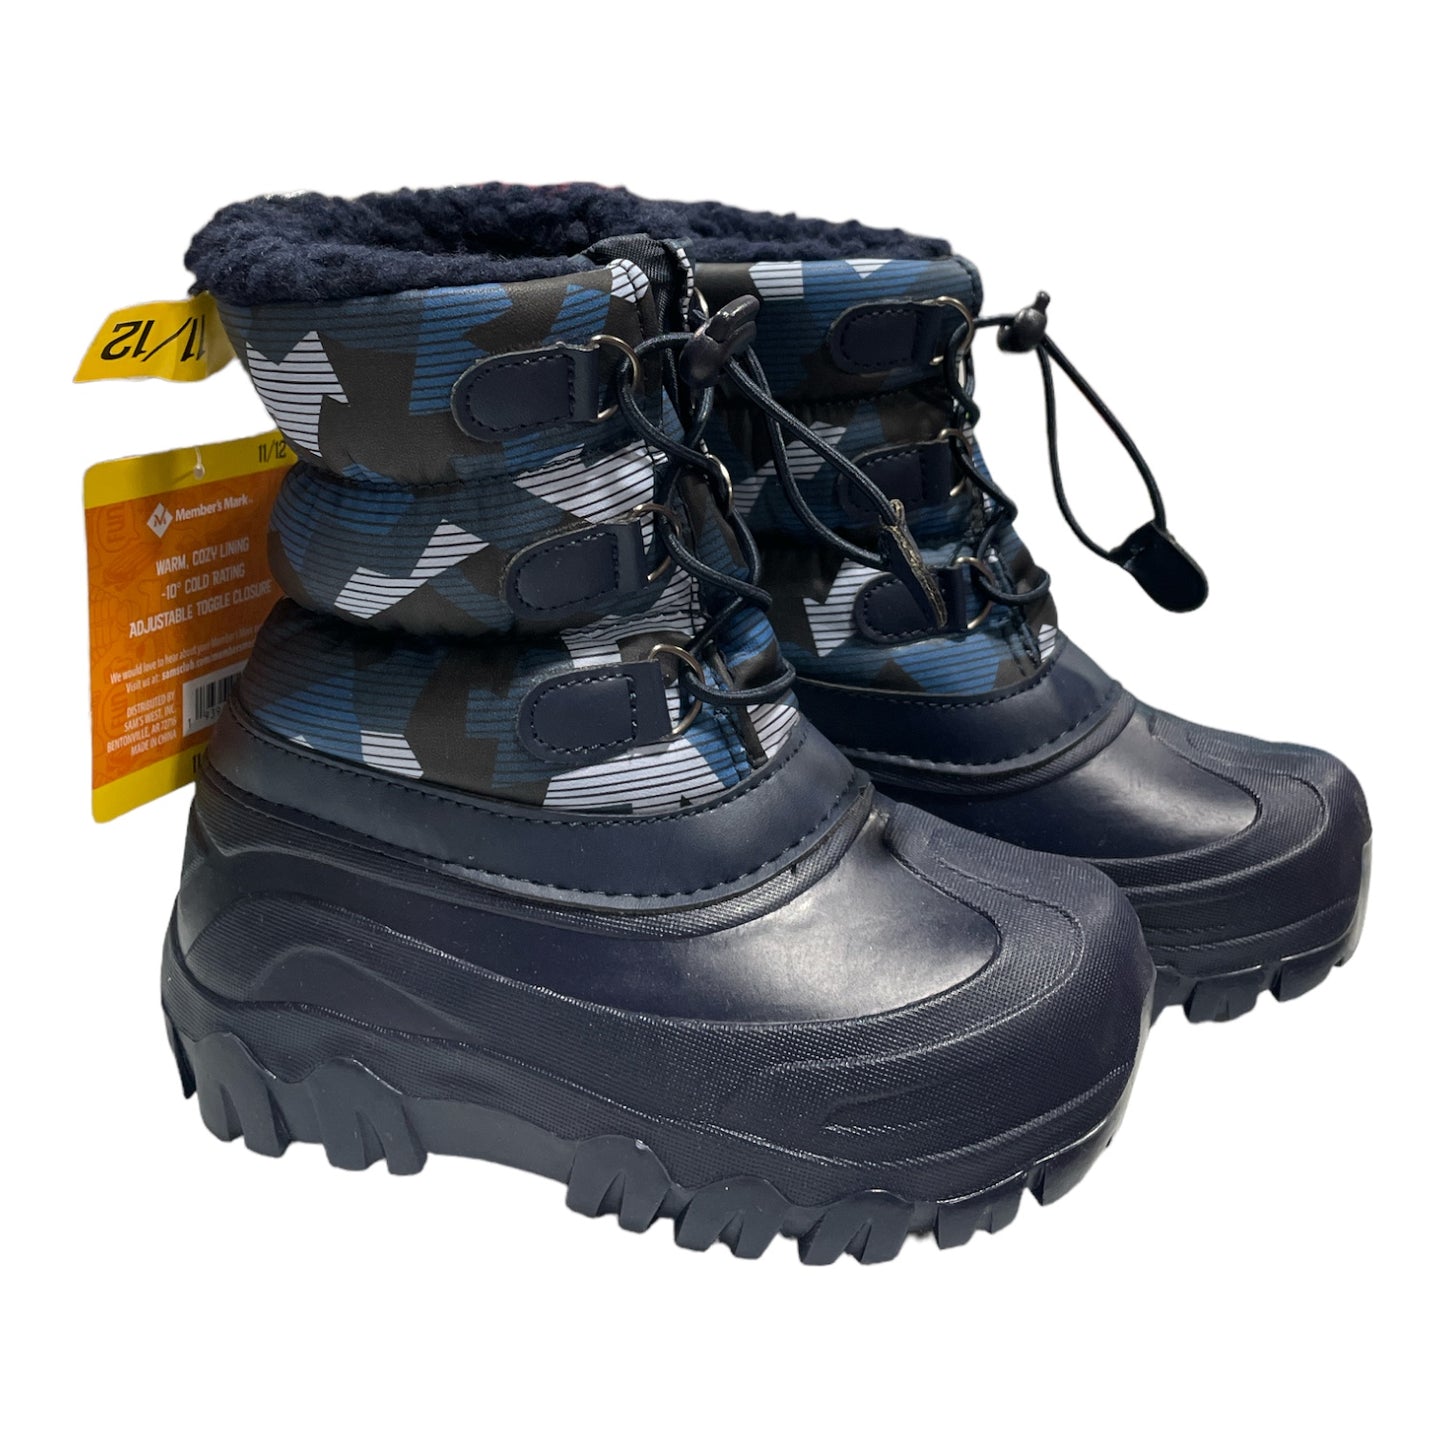 Member's Mark Toddler Boy's Pull On Insulated Snow Boots w/ Bungee Closure